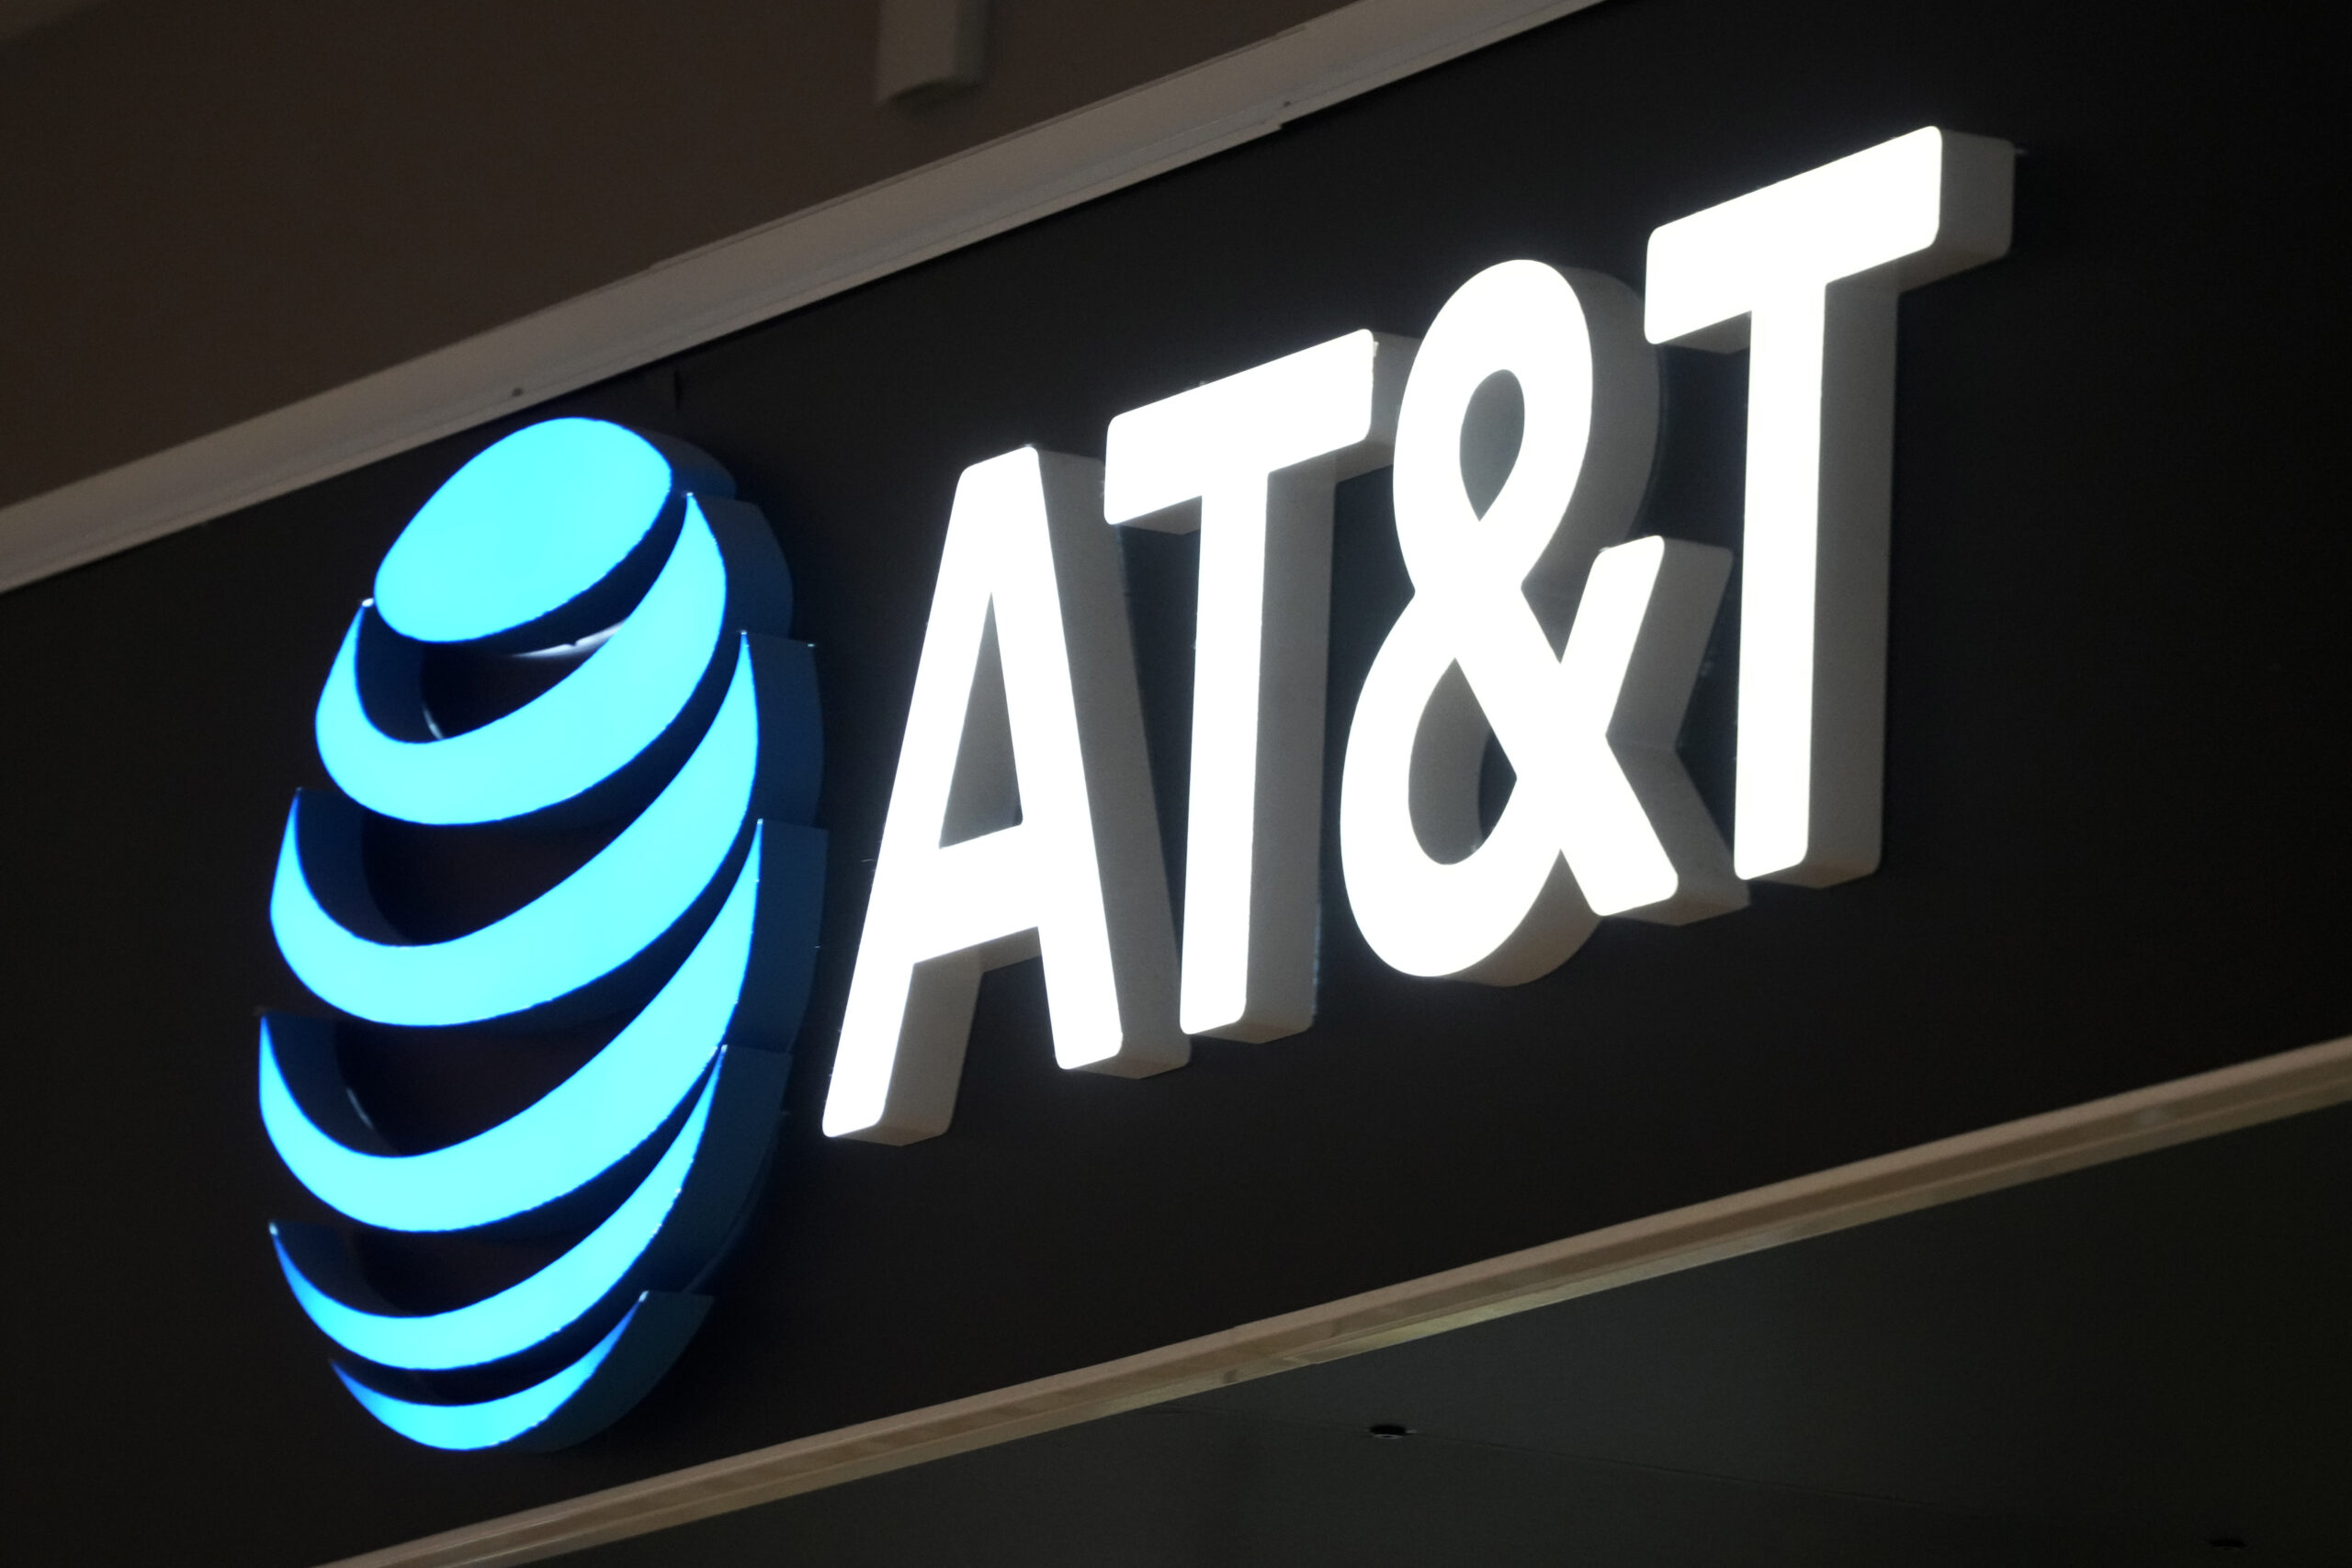 AT&T Notifies Users of Data Breach, Resets Millions of Passcodes